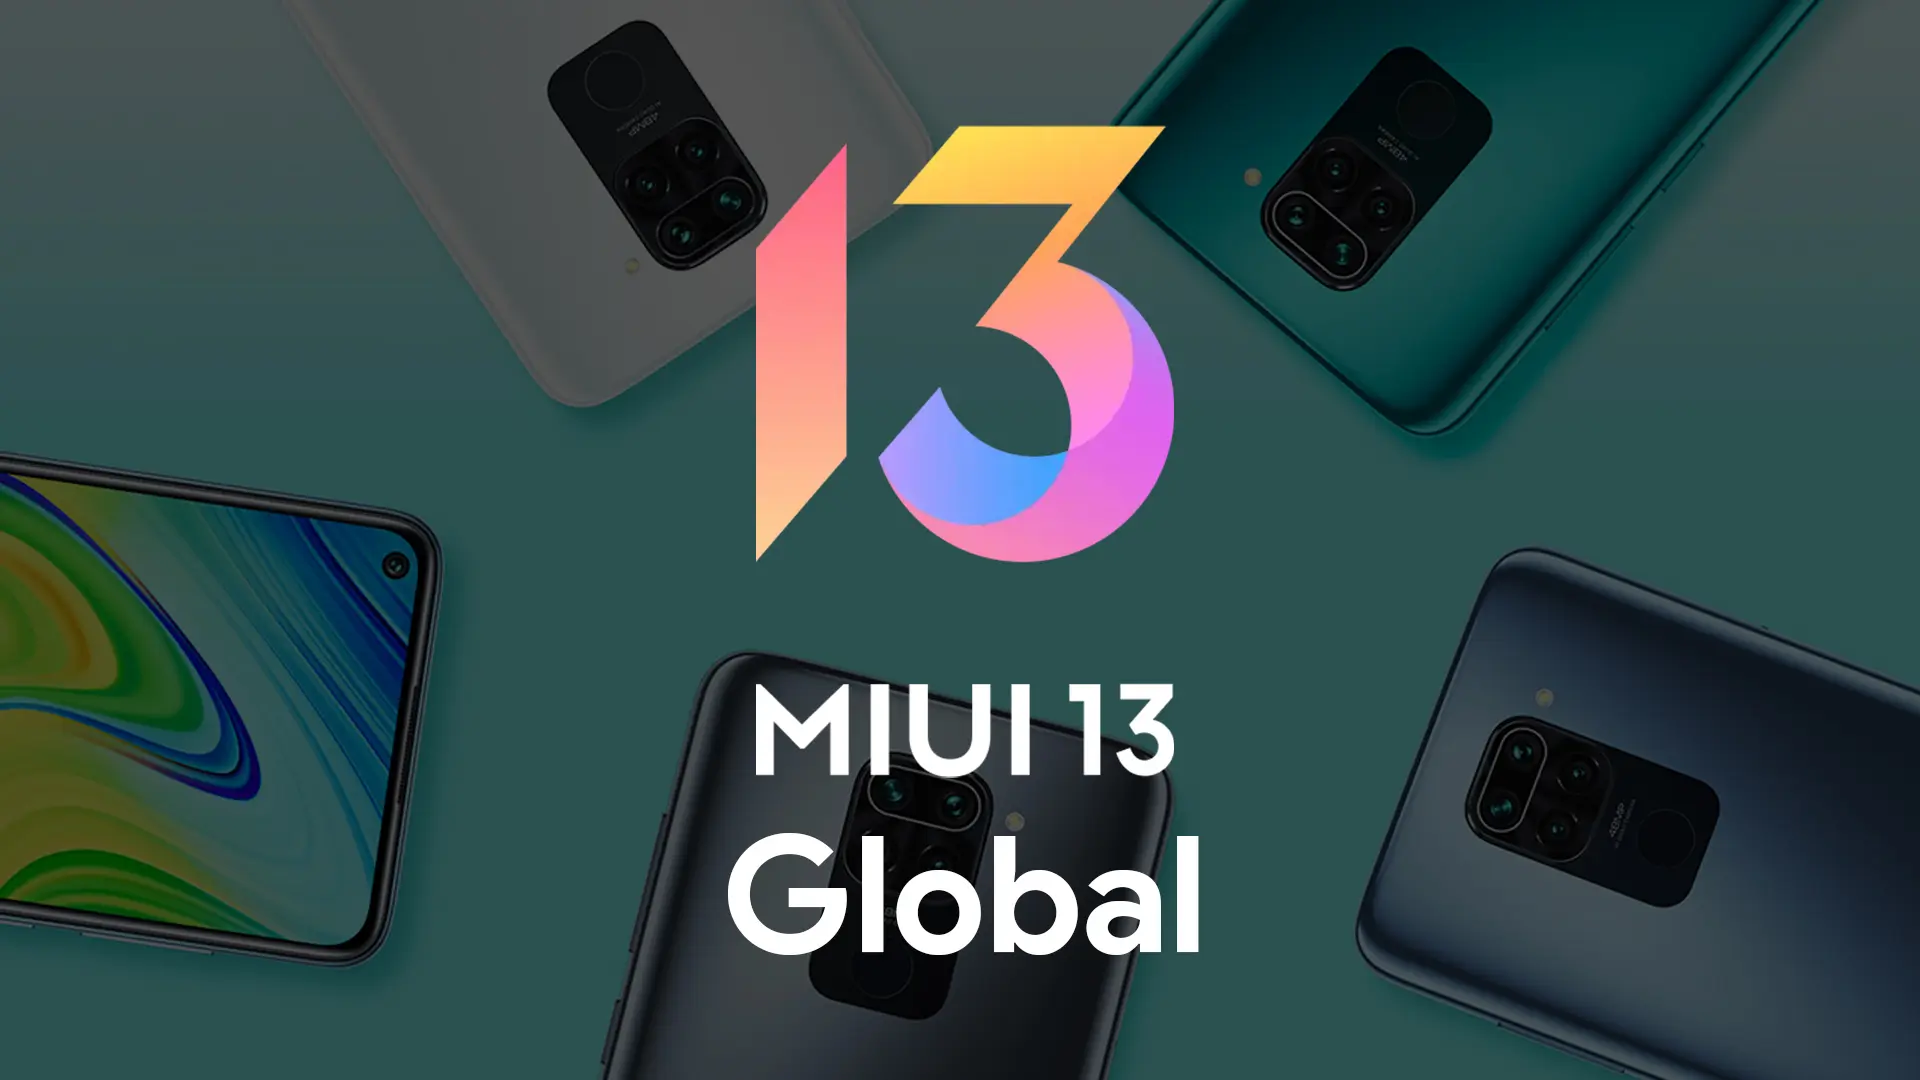 Three more budget Xiaomi smartphones received global firmware MIUI 13 on Android 12